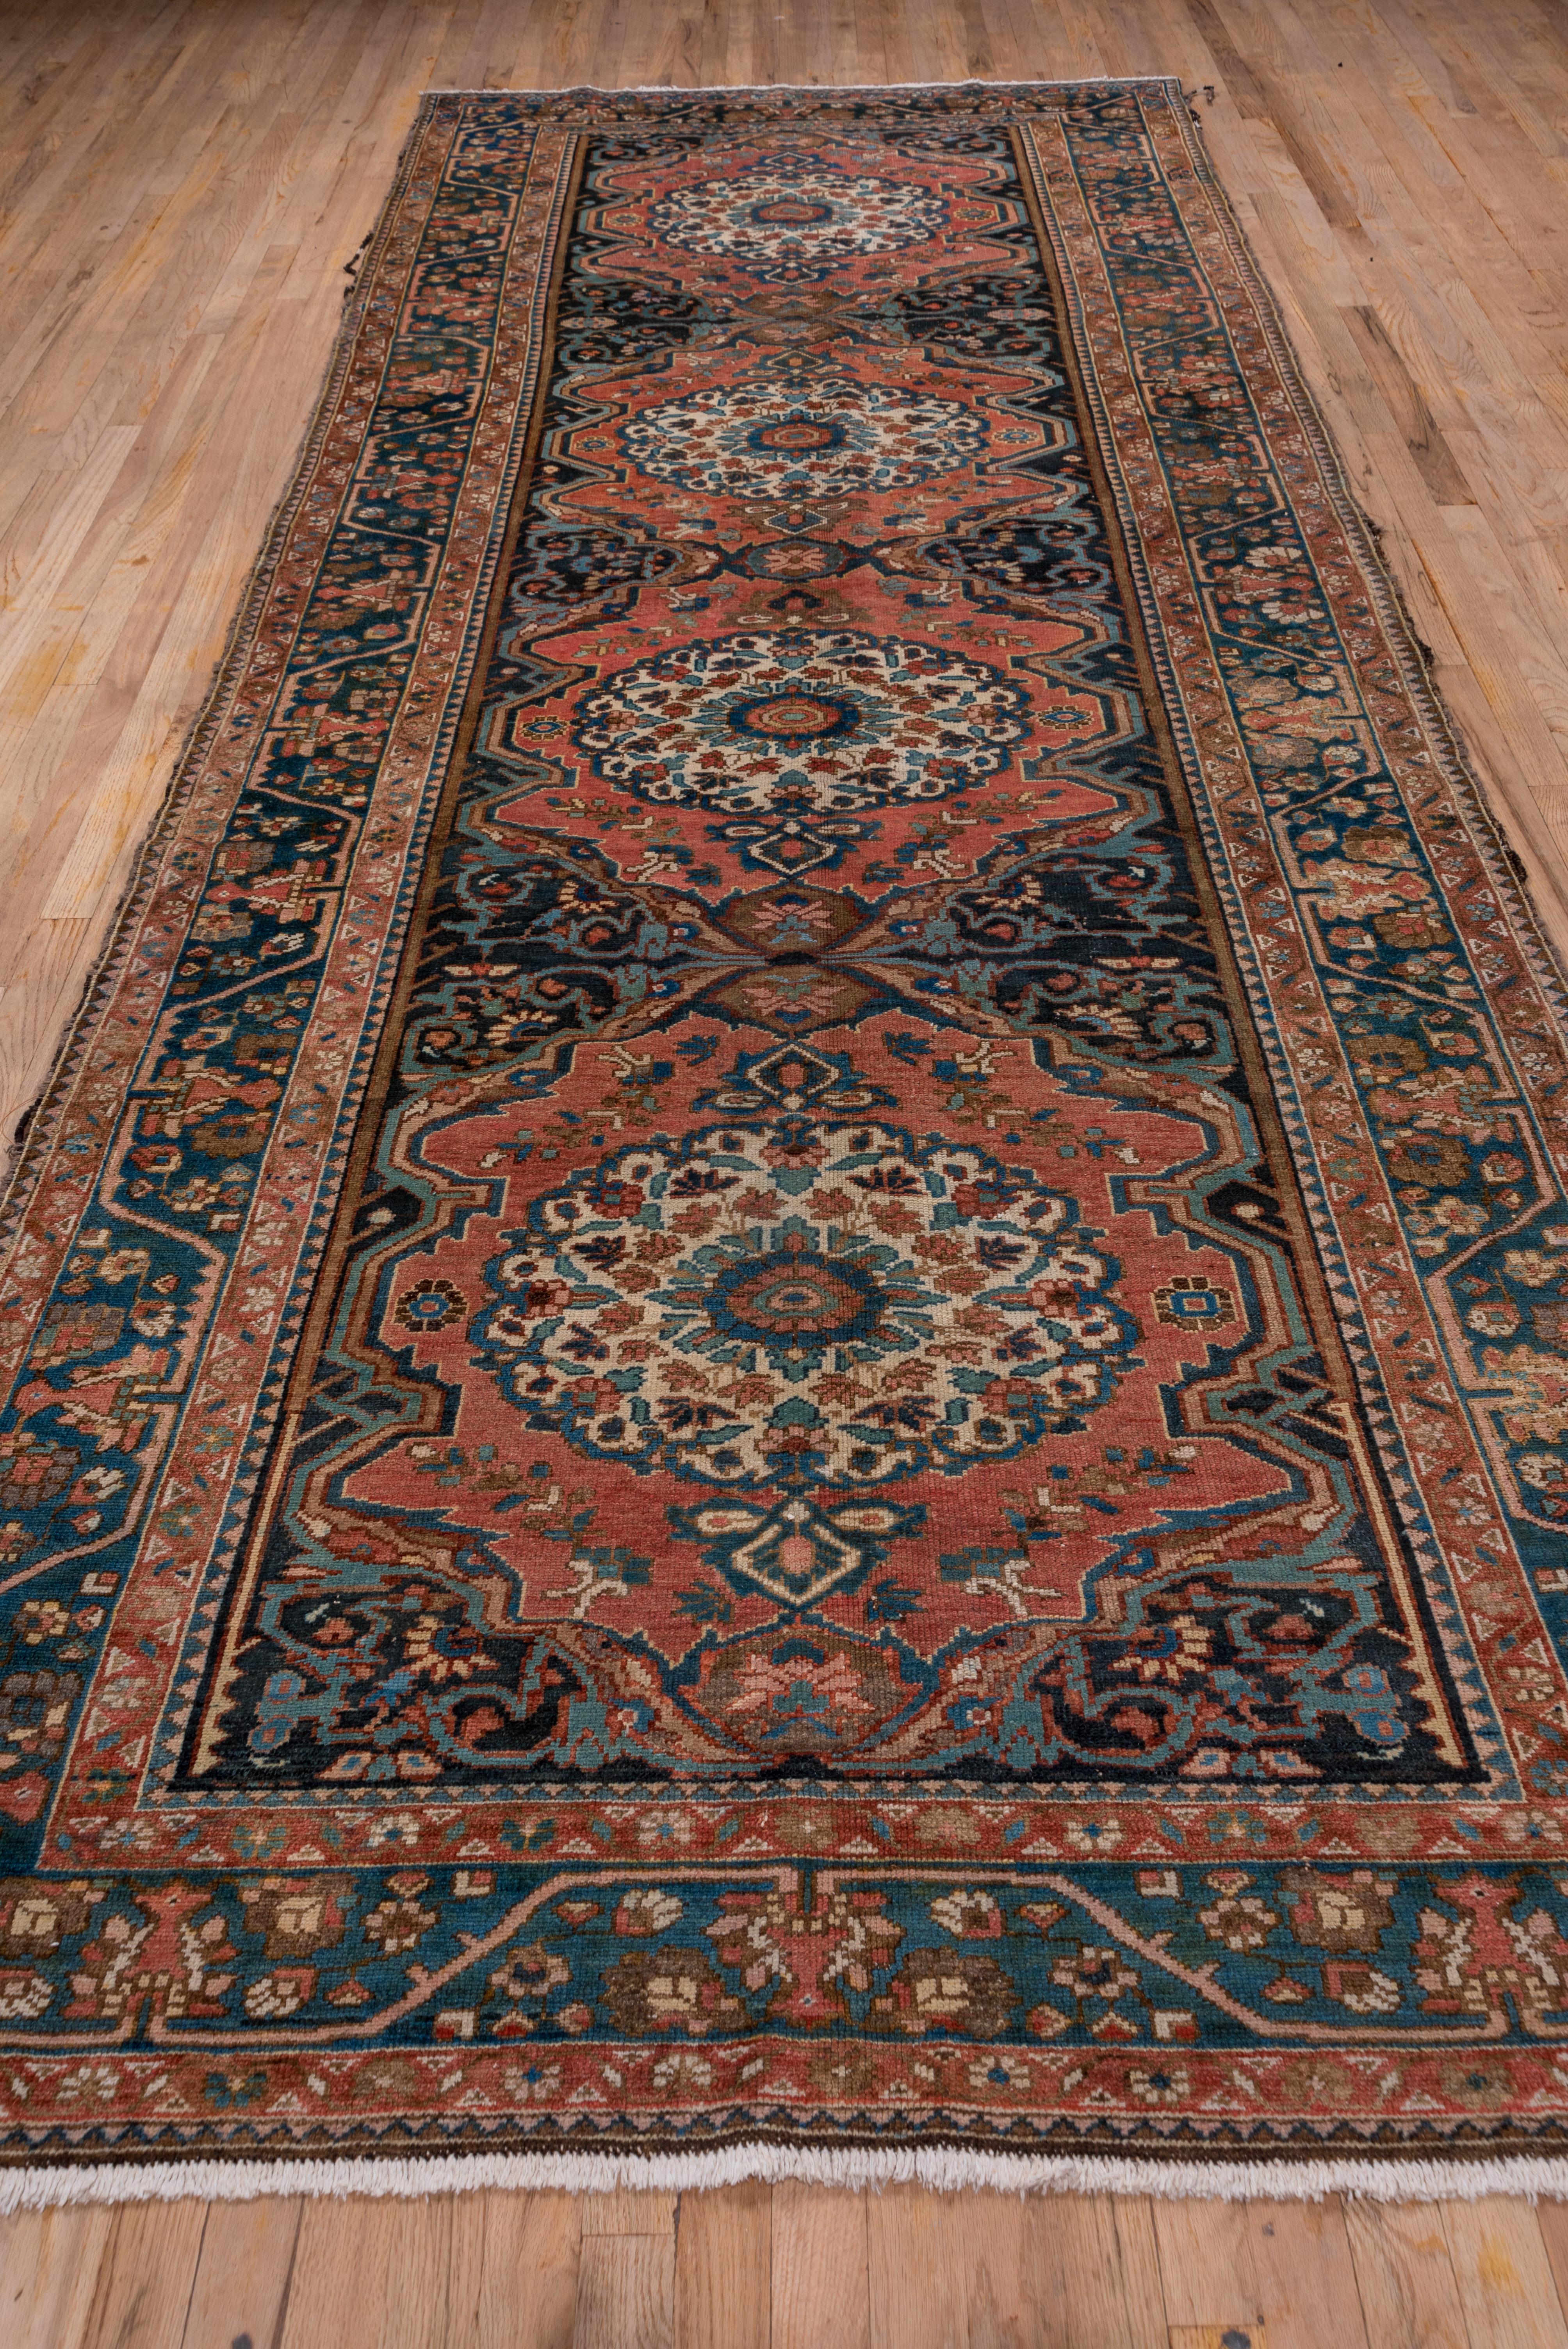 Early 20th Century Antique Rustic Persian Bakhtiary Gallery Carpet, Rose and Blue Field For Sale